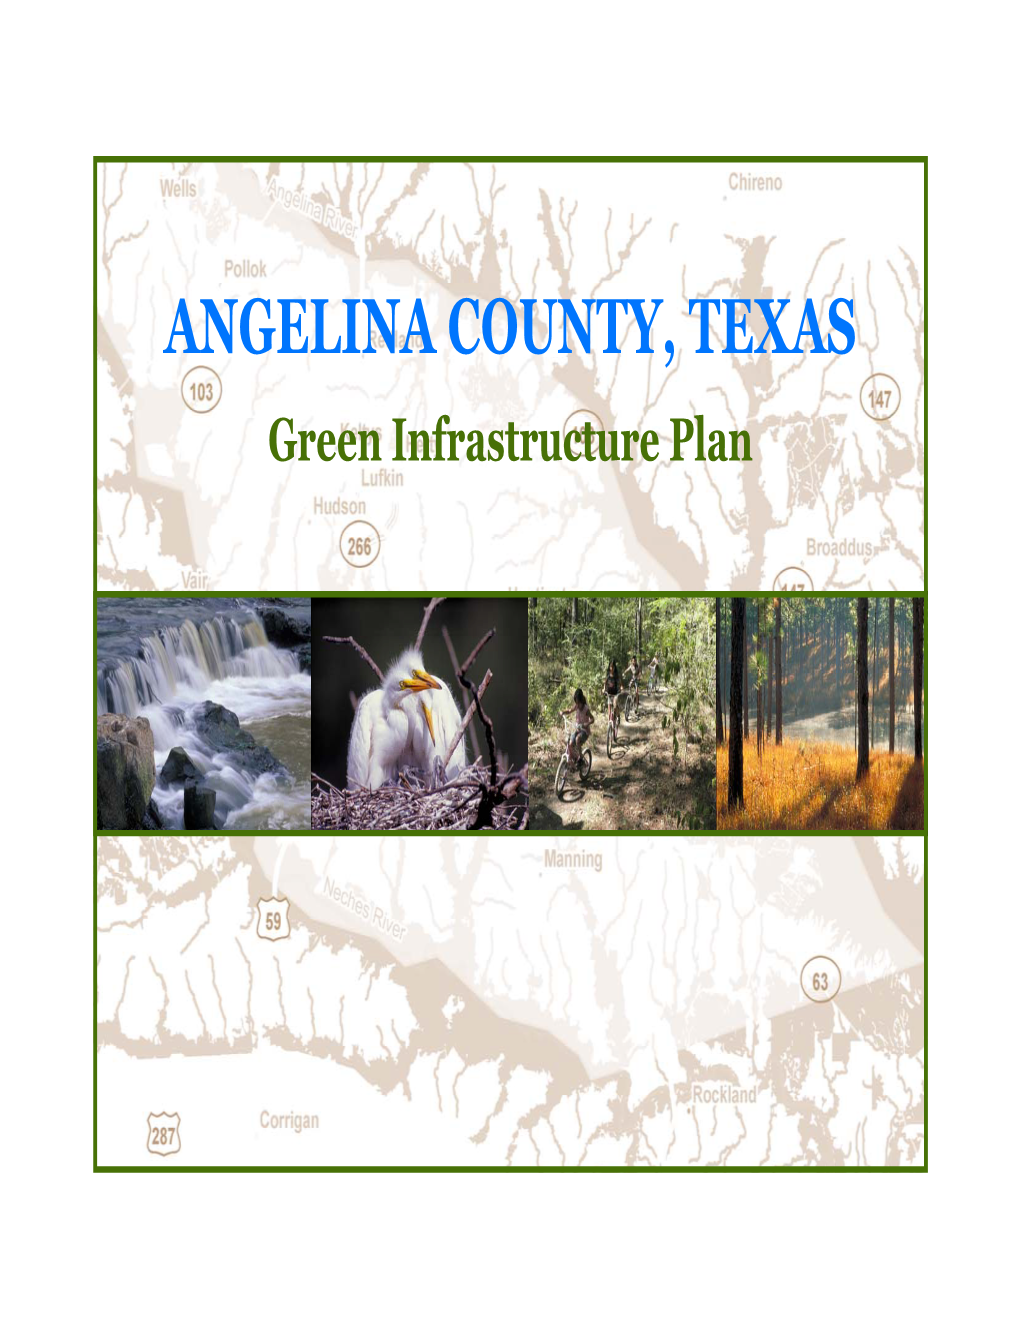 ANGELINA COUNTY, TEXAS Green Infrastructure Plan